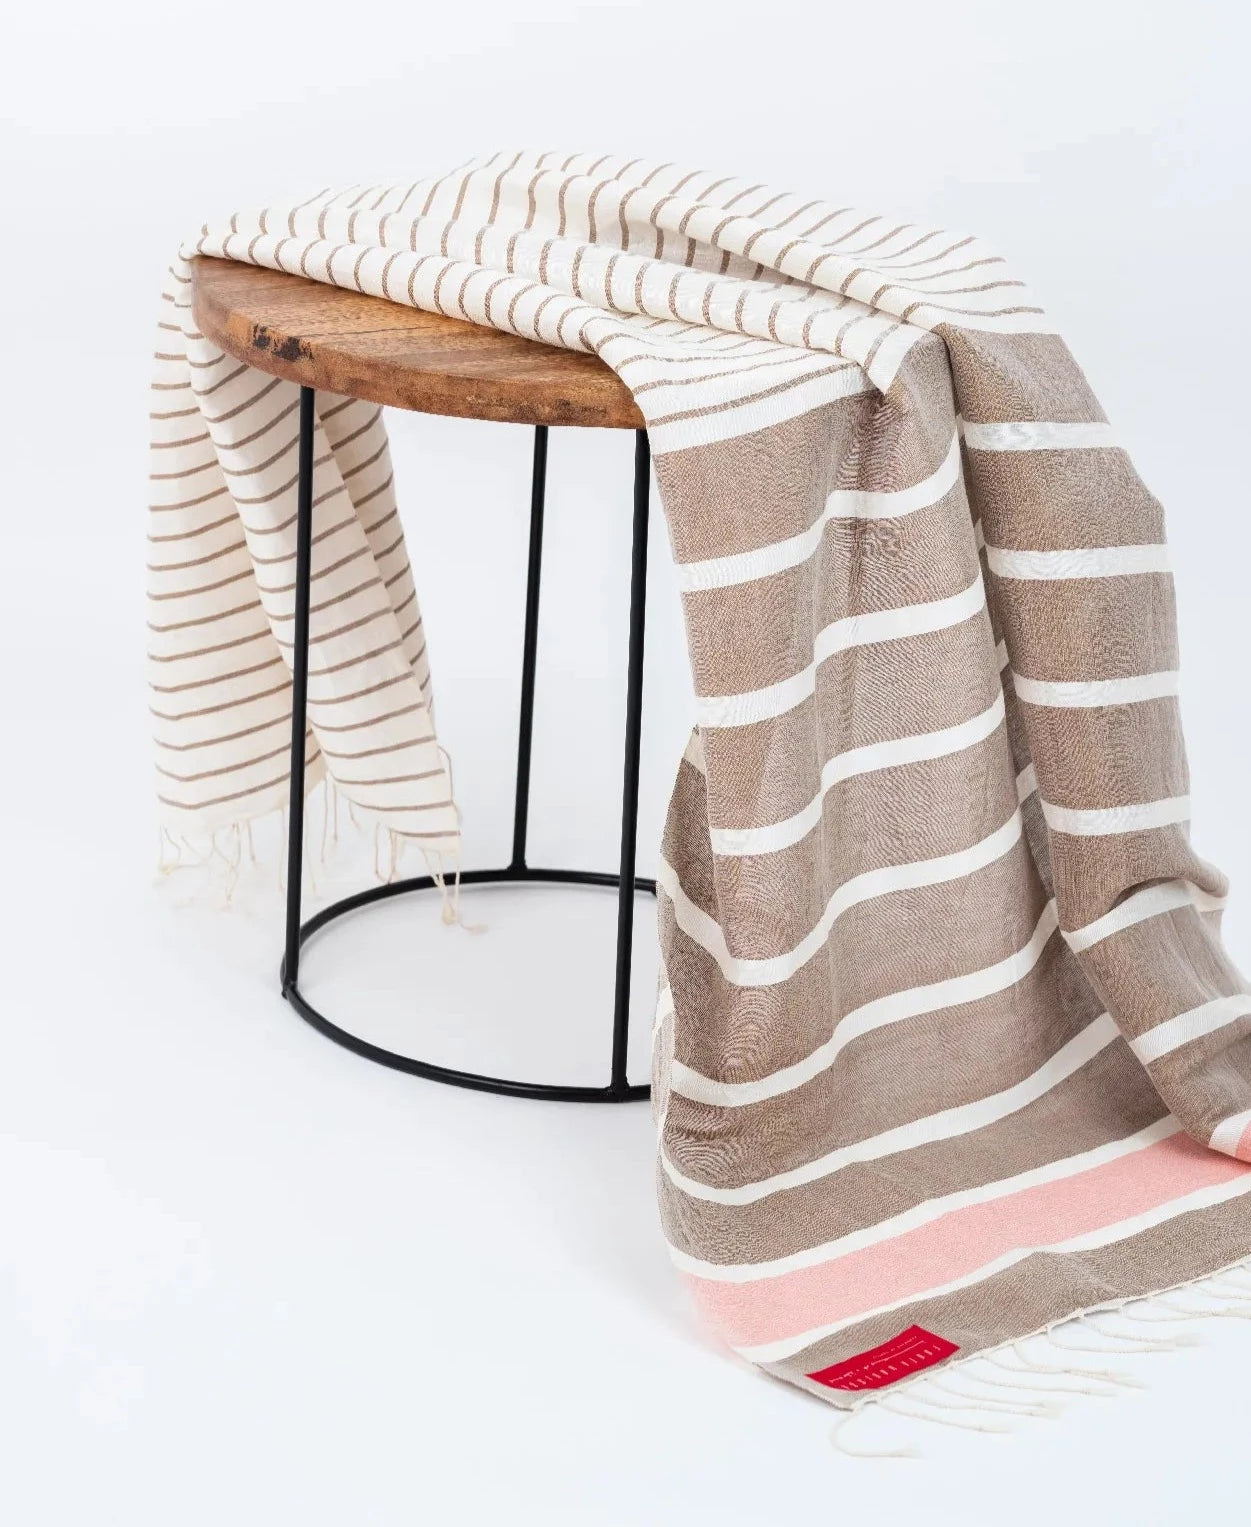 Ripple Effect Fouta Draped over wooden side table